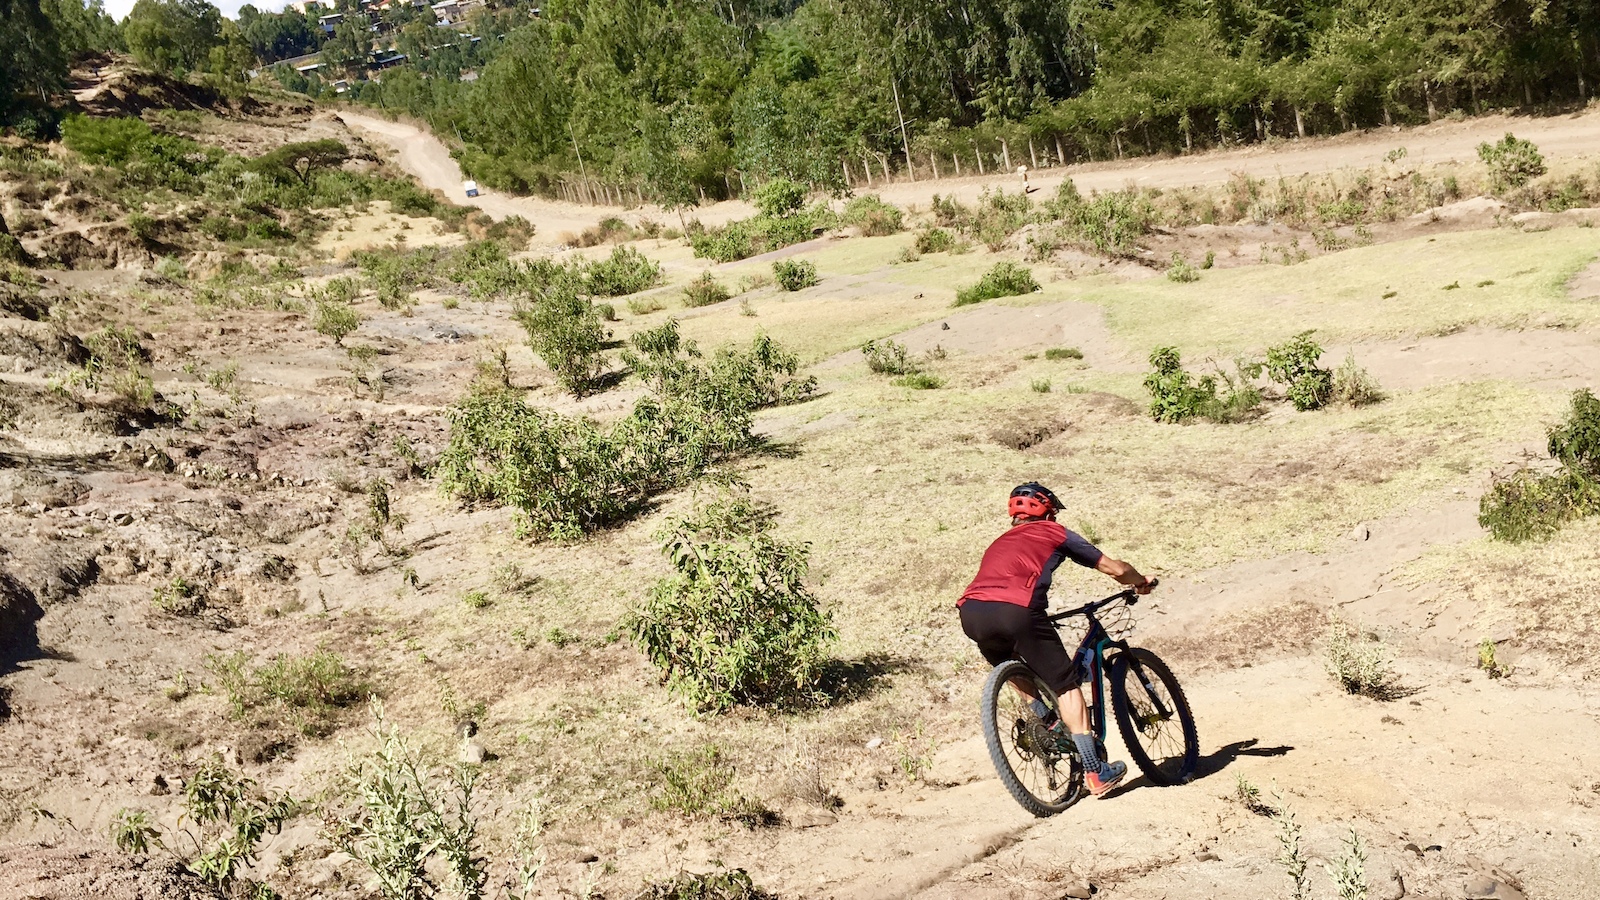 the 16th day, we have a smootth ride on the jumps and trails around Gondar